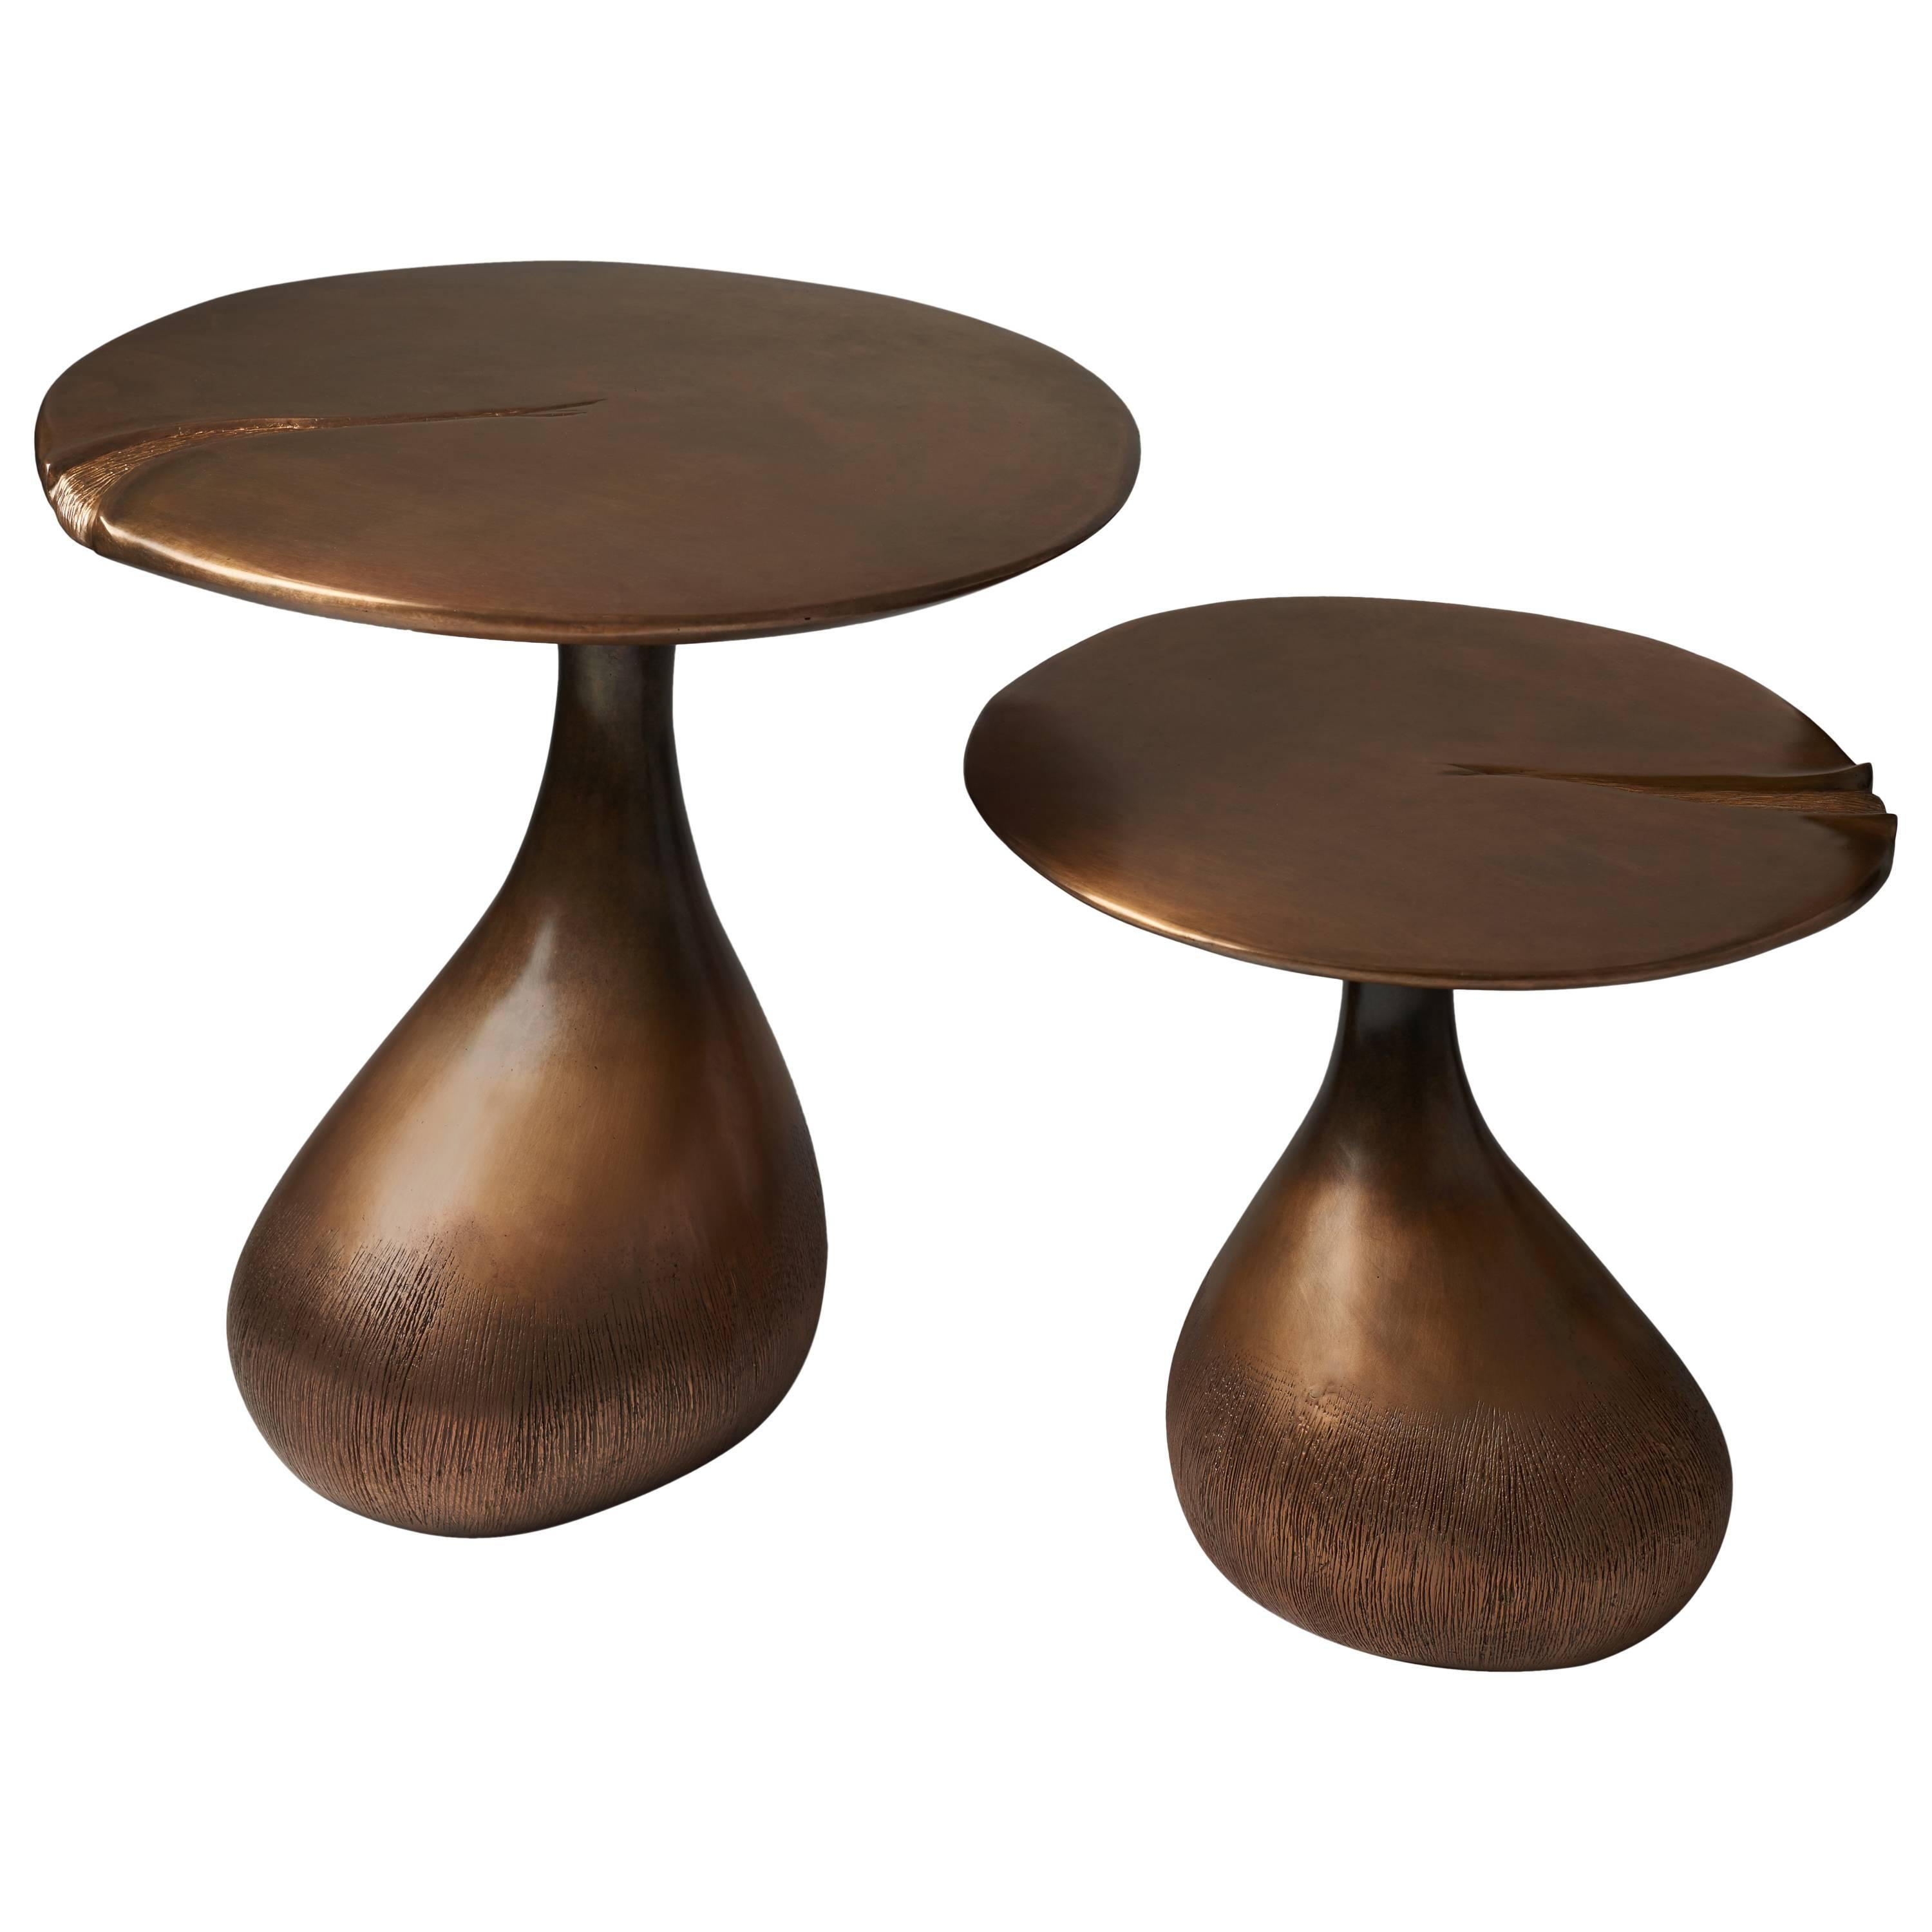 Pair of Bronze Gueridons / Side Tables by designer Hoon Moreau